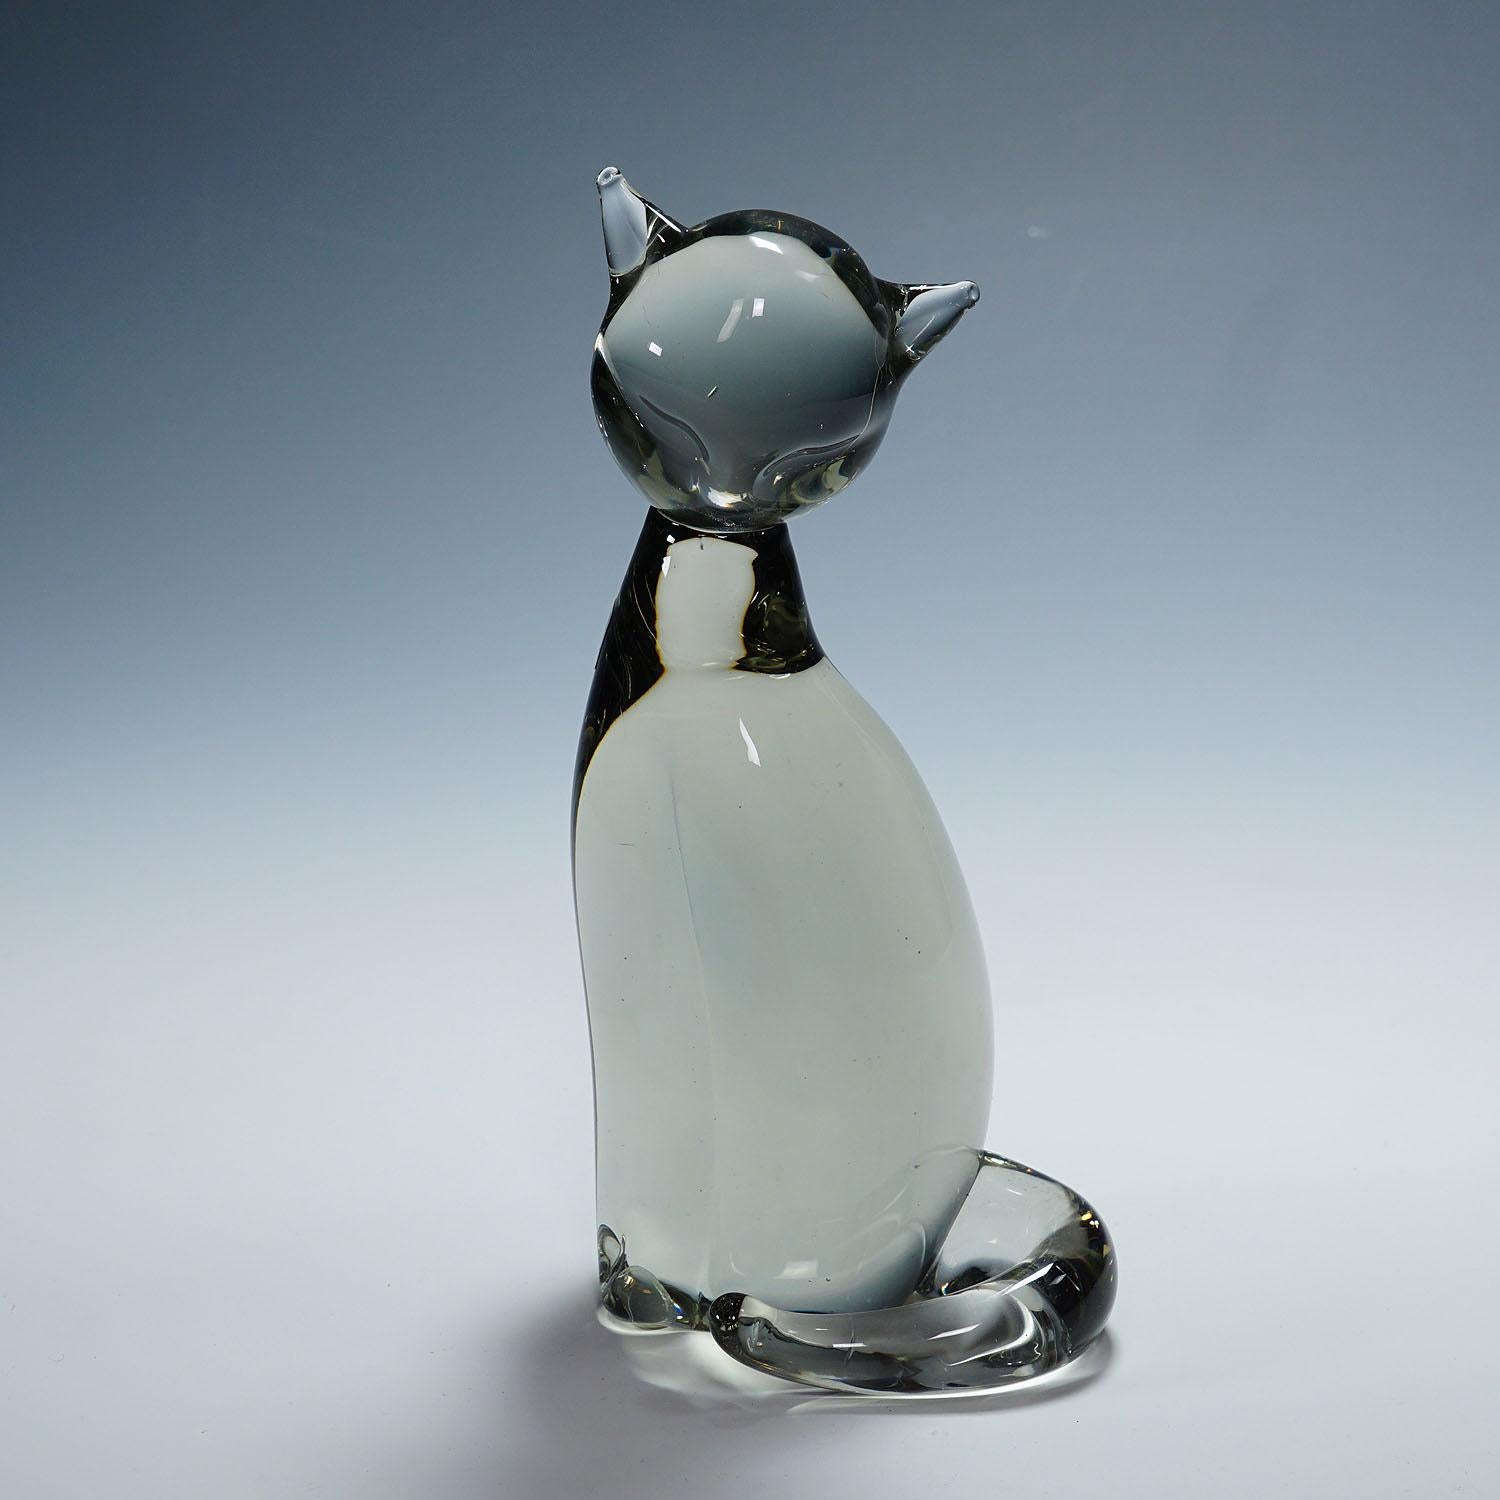 Sculpture of a Stylized Cat Designed by Livio Seguso ca. 1970s

A cute sculpture of a stylized cat in smoke grey glass. Hand made in the Gral glass manufactory, Germany. It was designed by Livio Seguso ca. 1970. The body is with factory lable and